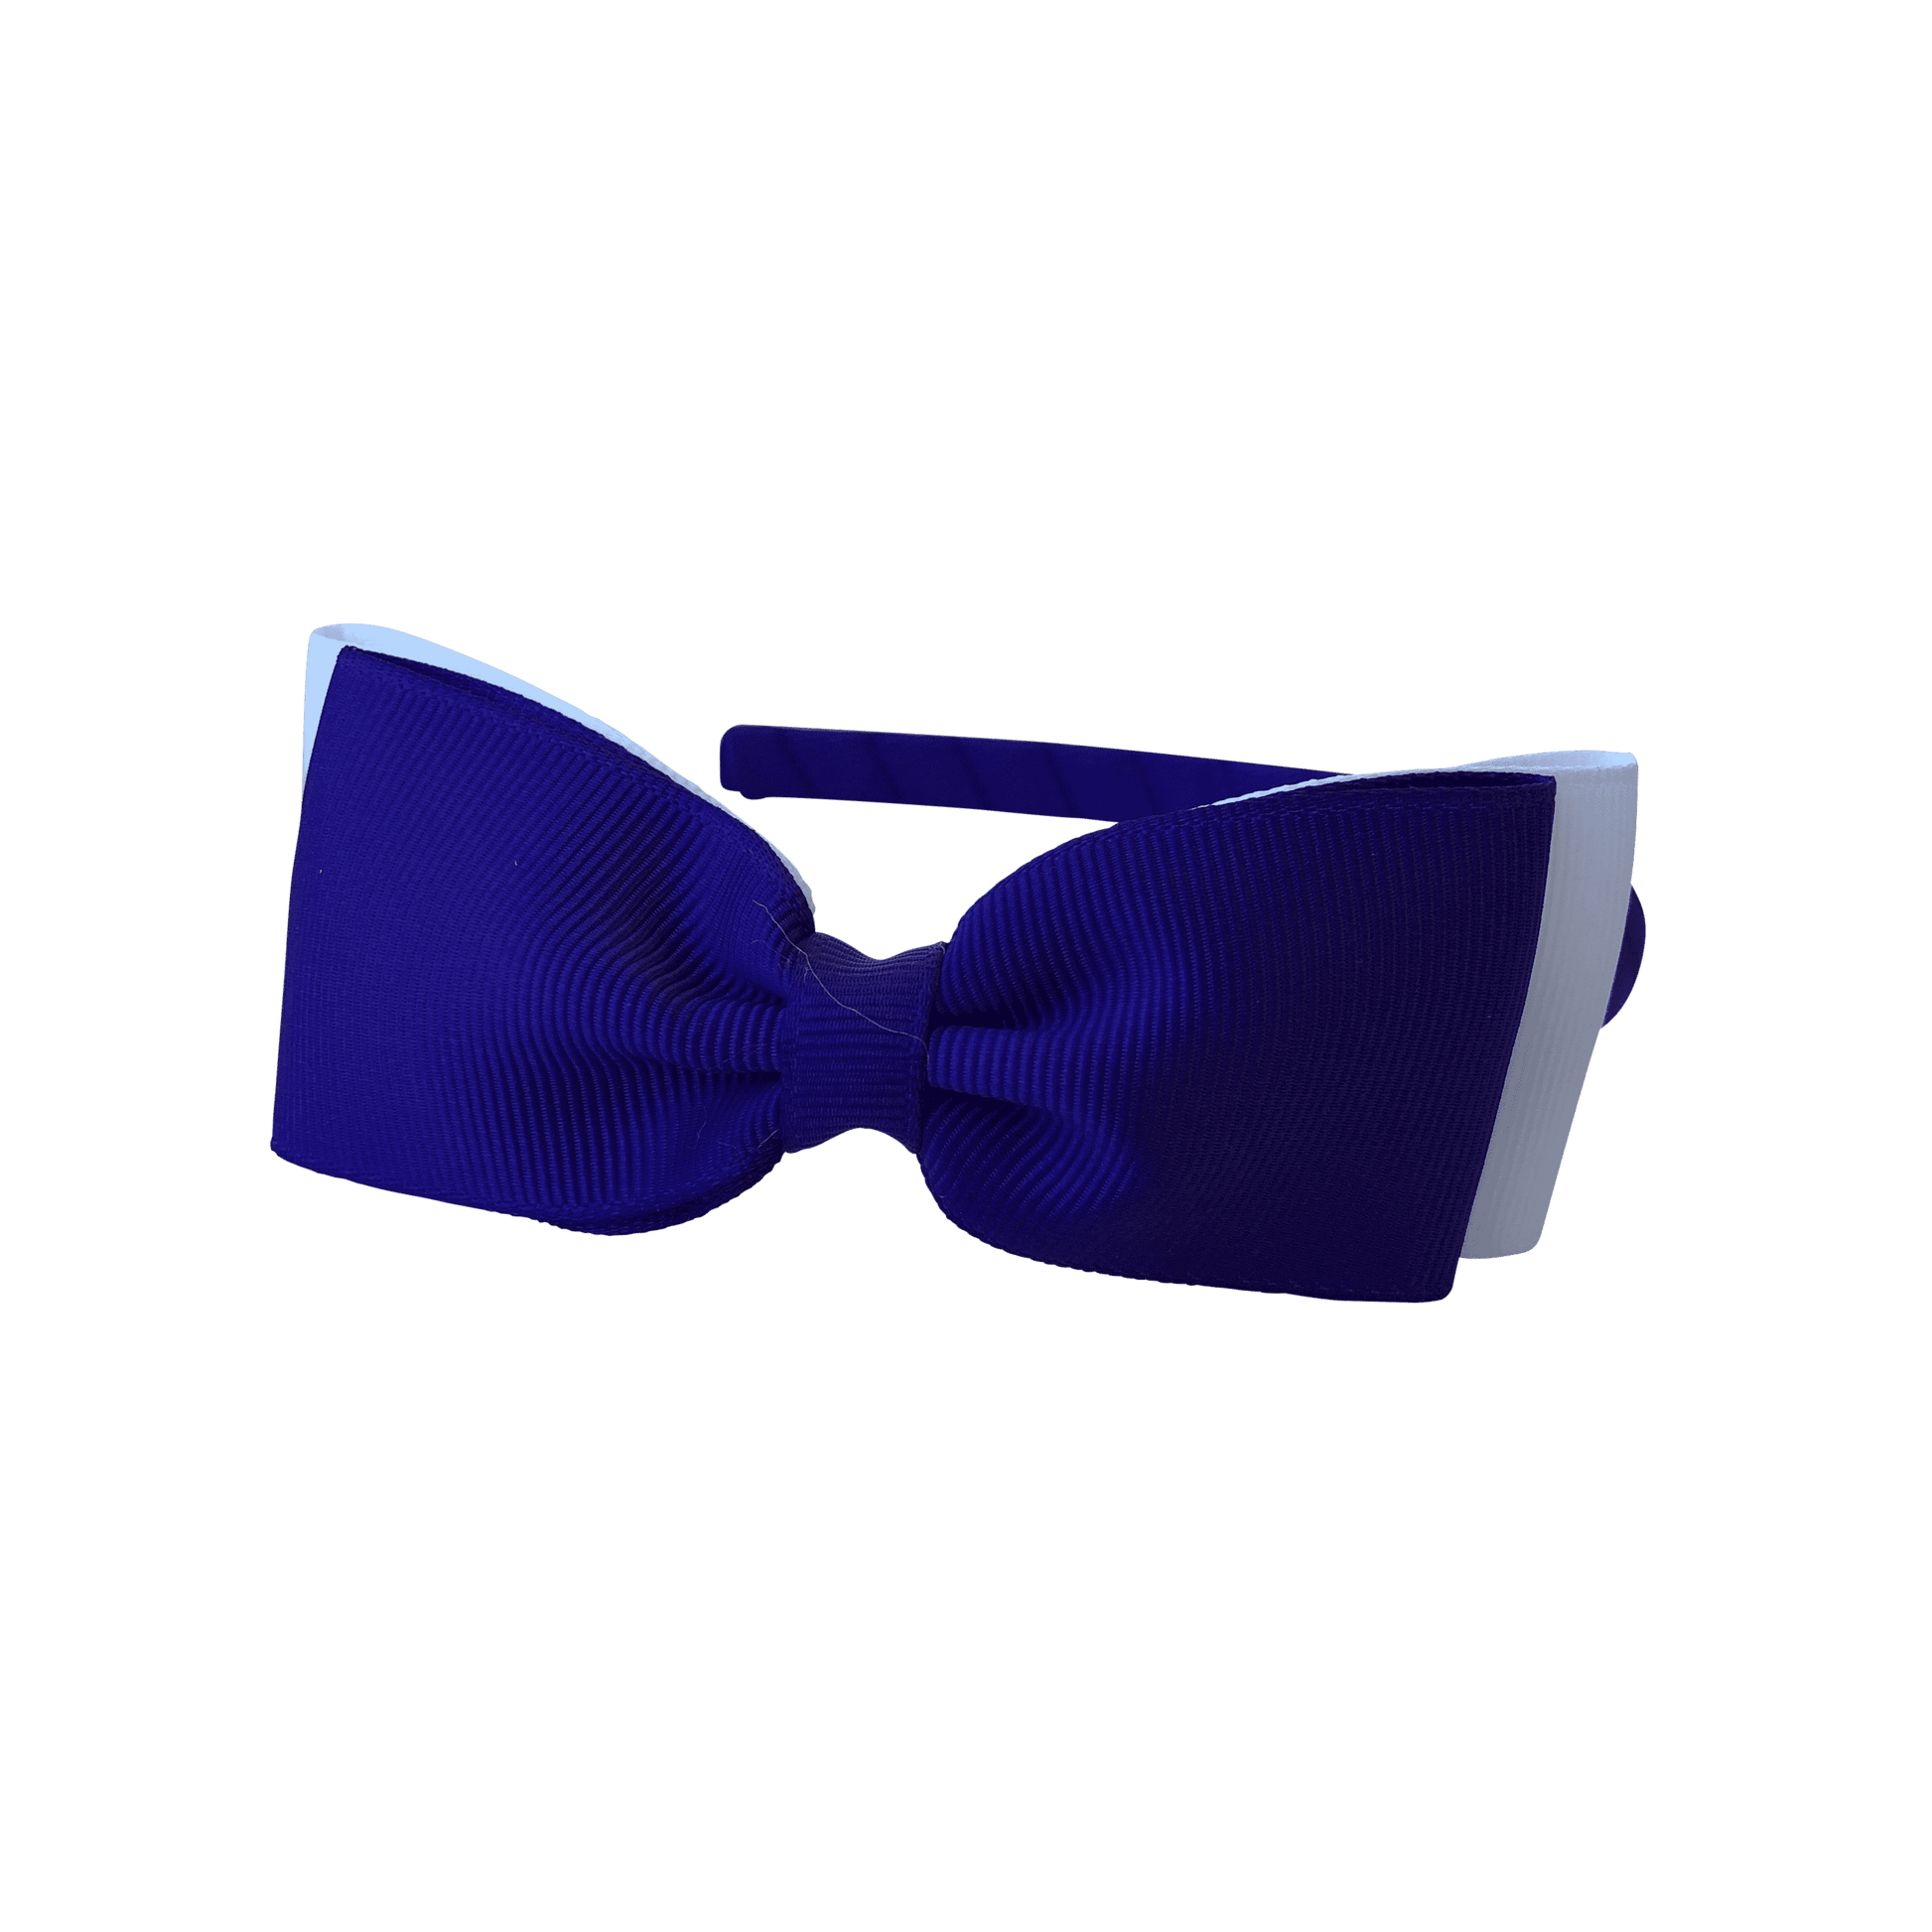 Purple & White Hair Accessories - Assorted Hair Accessories - School Uniform Hair Accessories - Ponytails and Fairytales